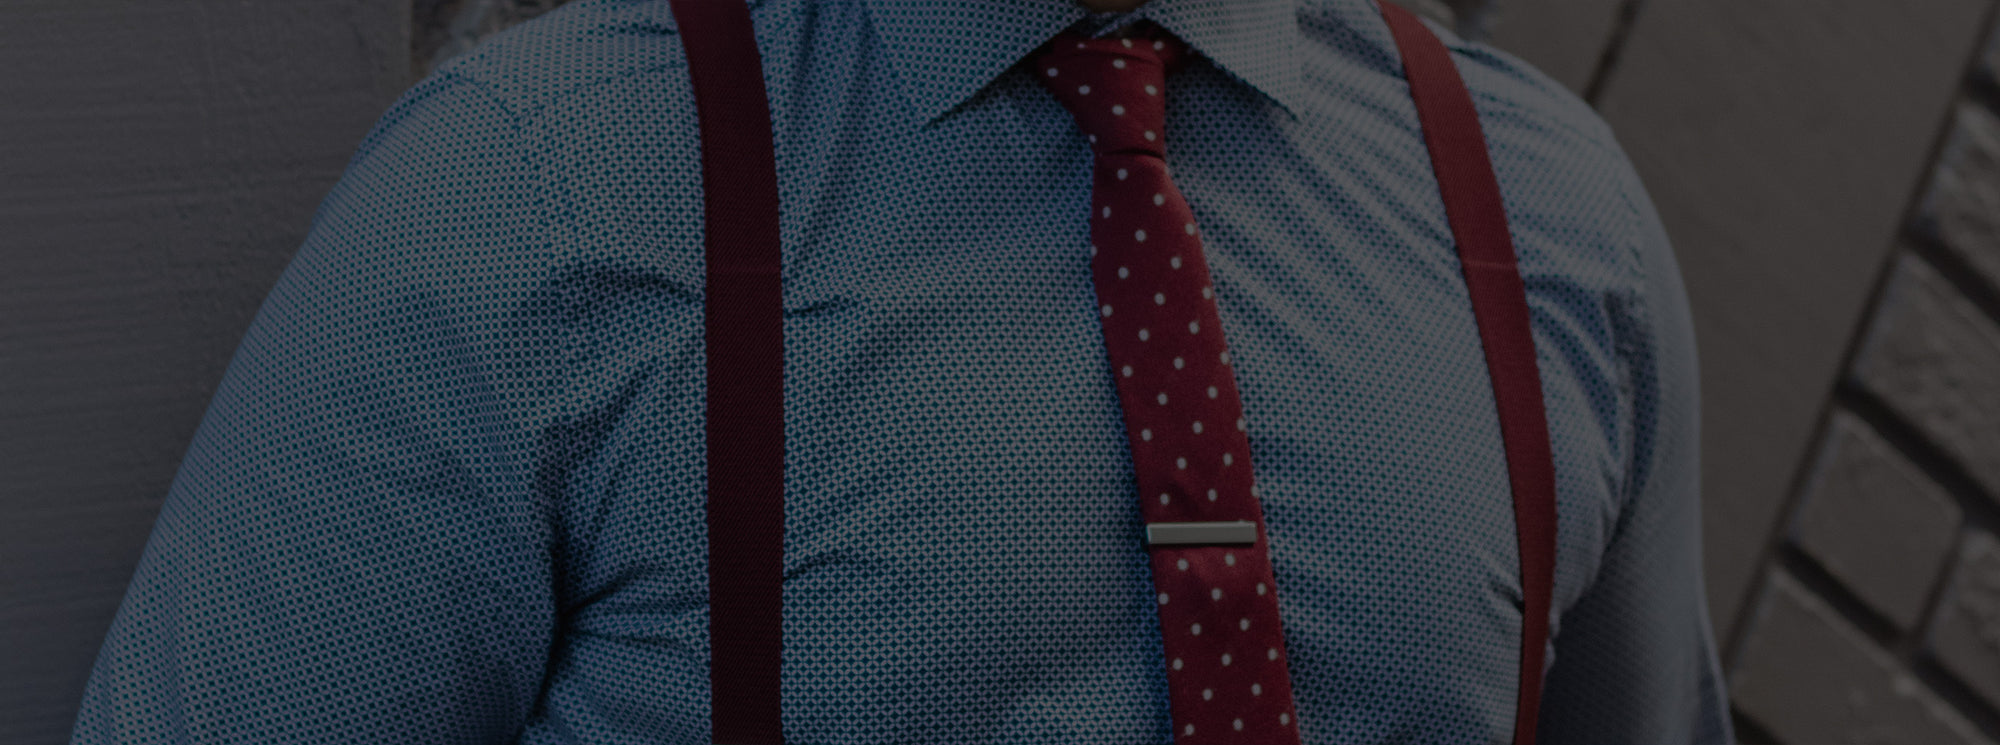 Man wearing a red polka dot tie with suspenders